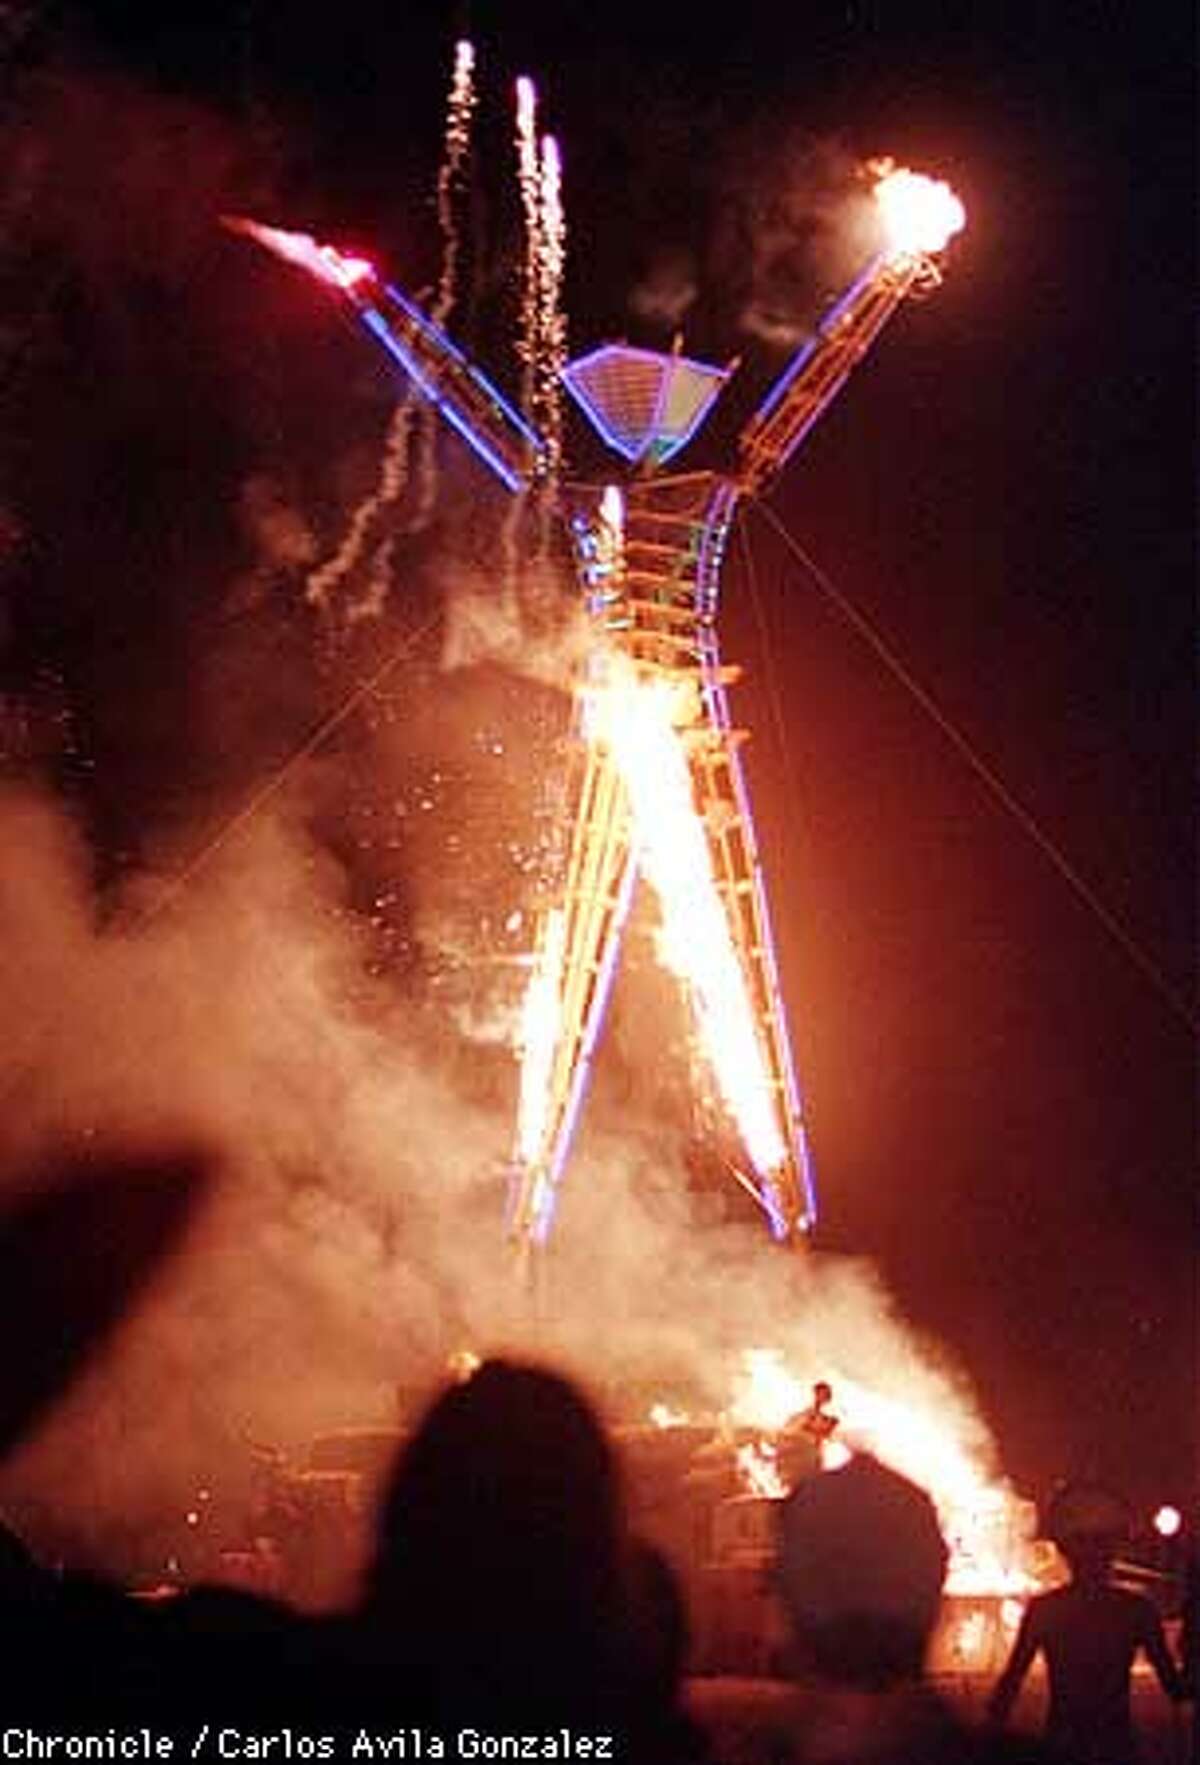 At the end of the five-day long Burning Man Festival, the four-story tall "Man" is burned and destroyed using explosives.(CHRONICLE PHOTO BY CARLOS AVILA GONZALEZ)